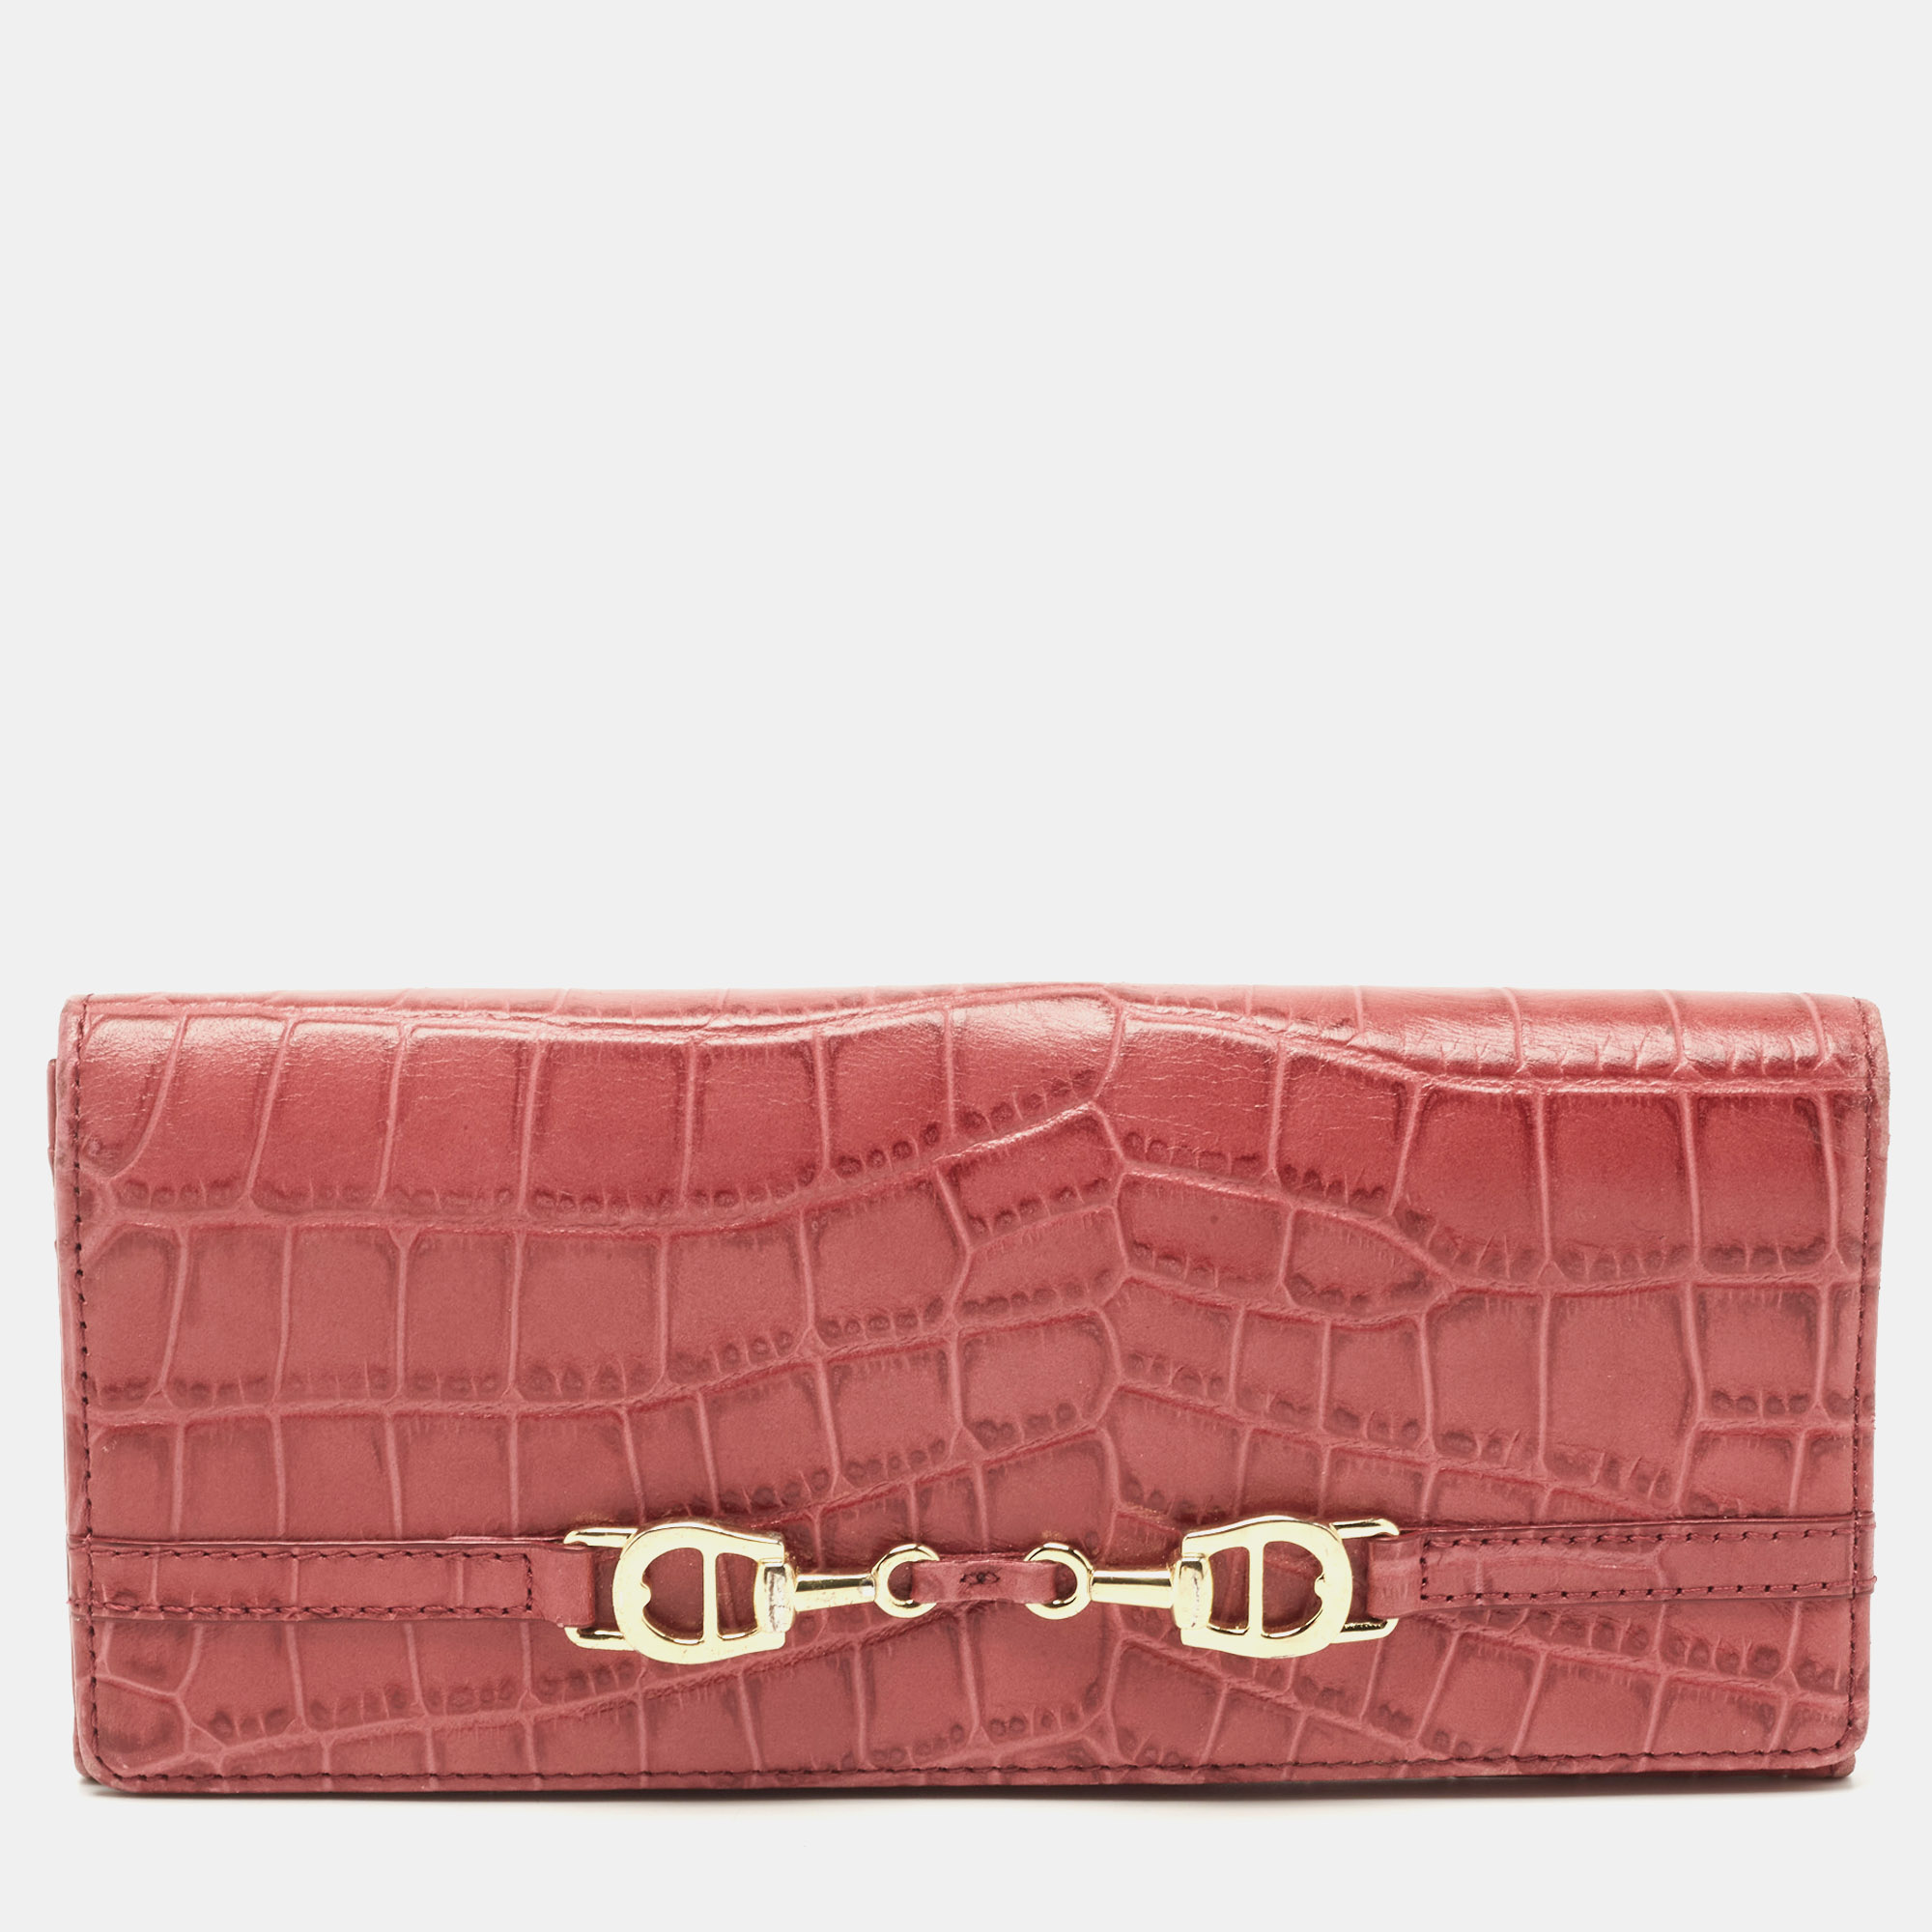 Aigner pink croc embossed leather continental wallet